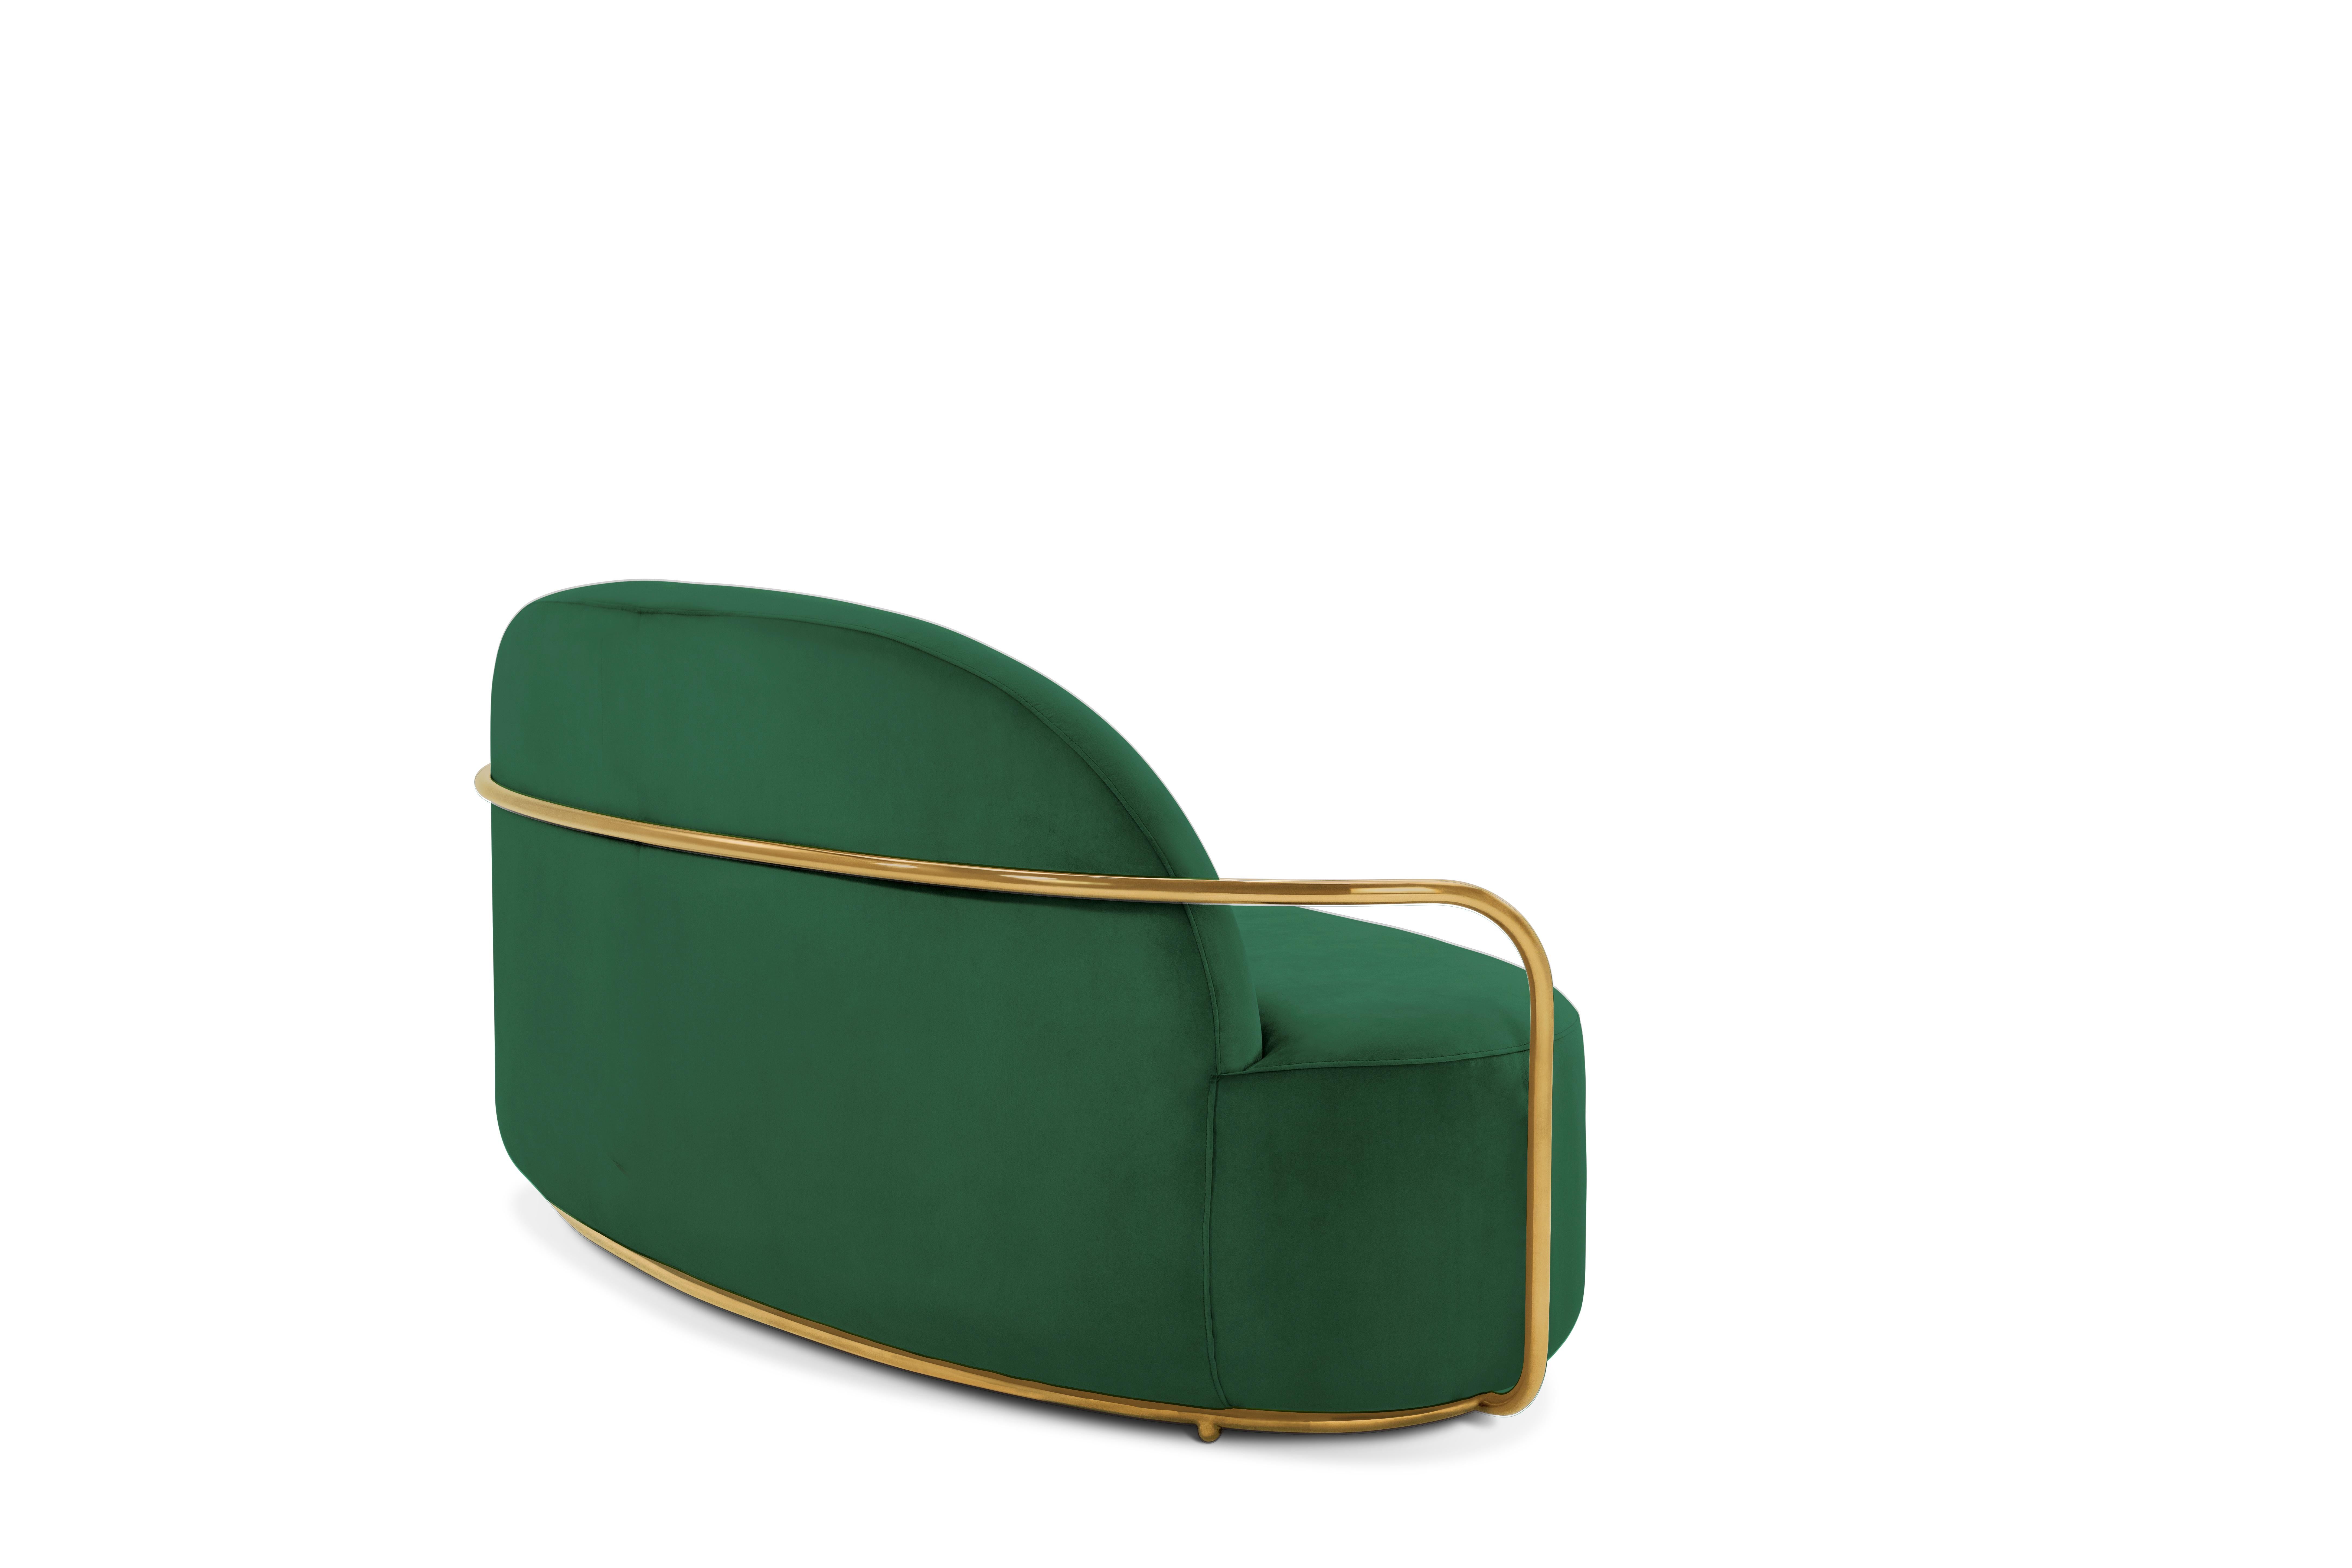 Modern Orion 3 Seat Sofa with Plush Green Velvet and Gold Arms by Nika Zupanc For Sale